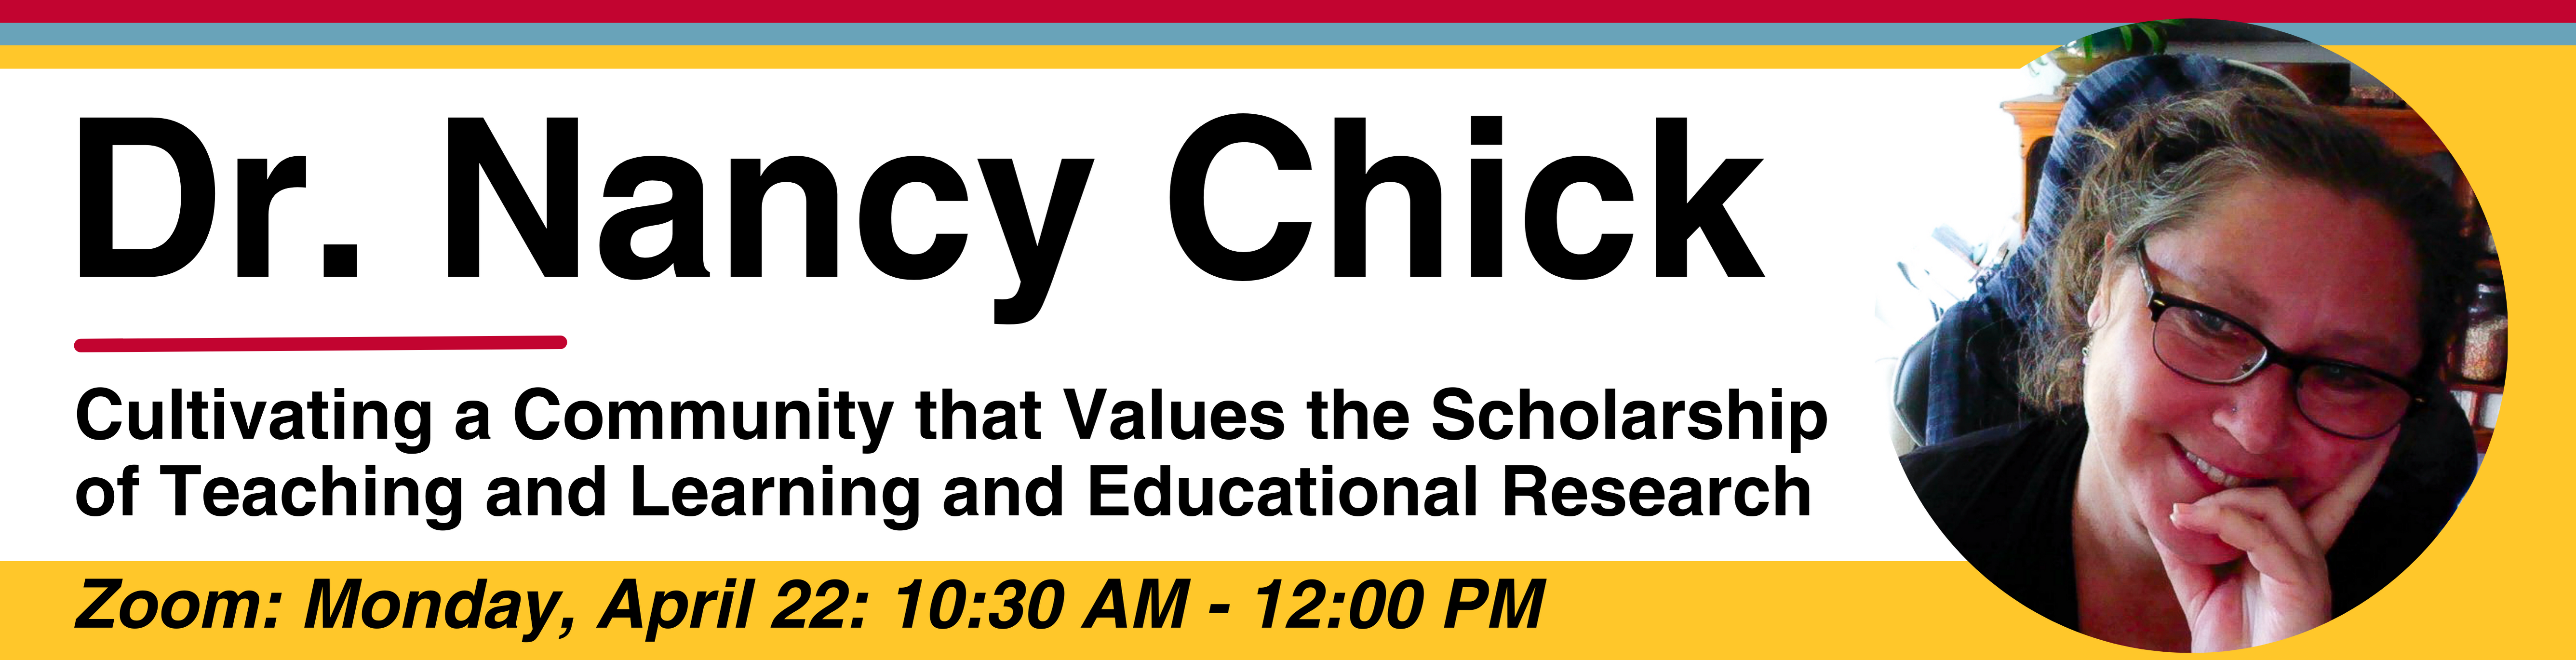 Invited Guest Speaker, Dr. Nancy Chick, on Cultivating a Community that Values the Scholarship of Teaching and Learning and Educational Research 